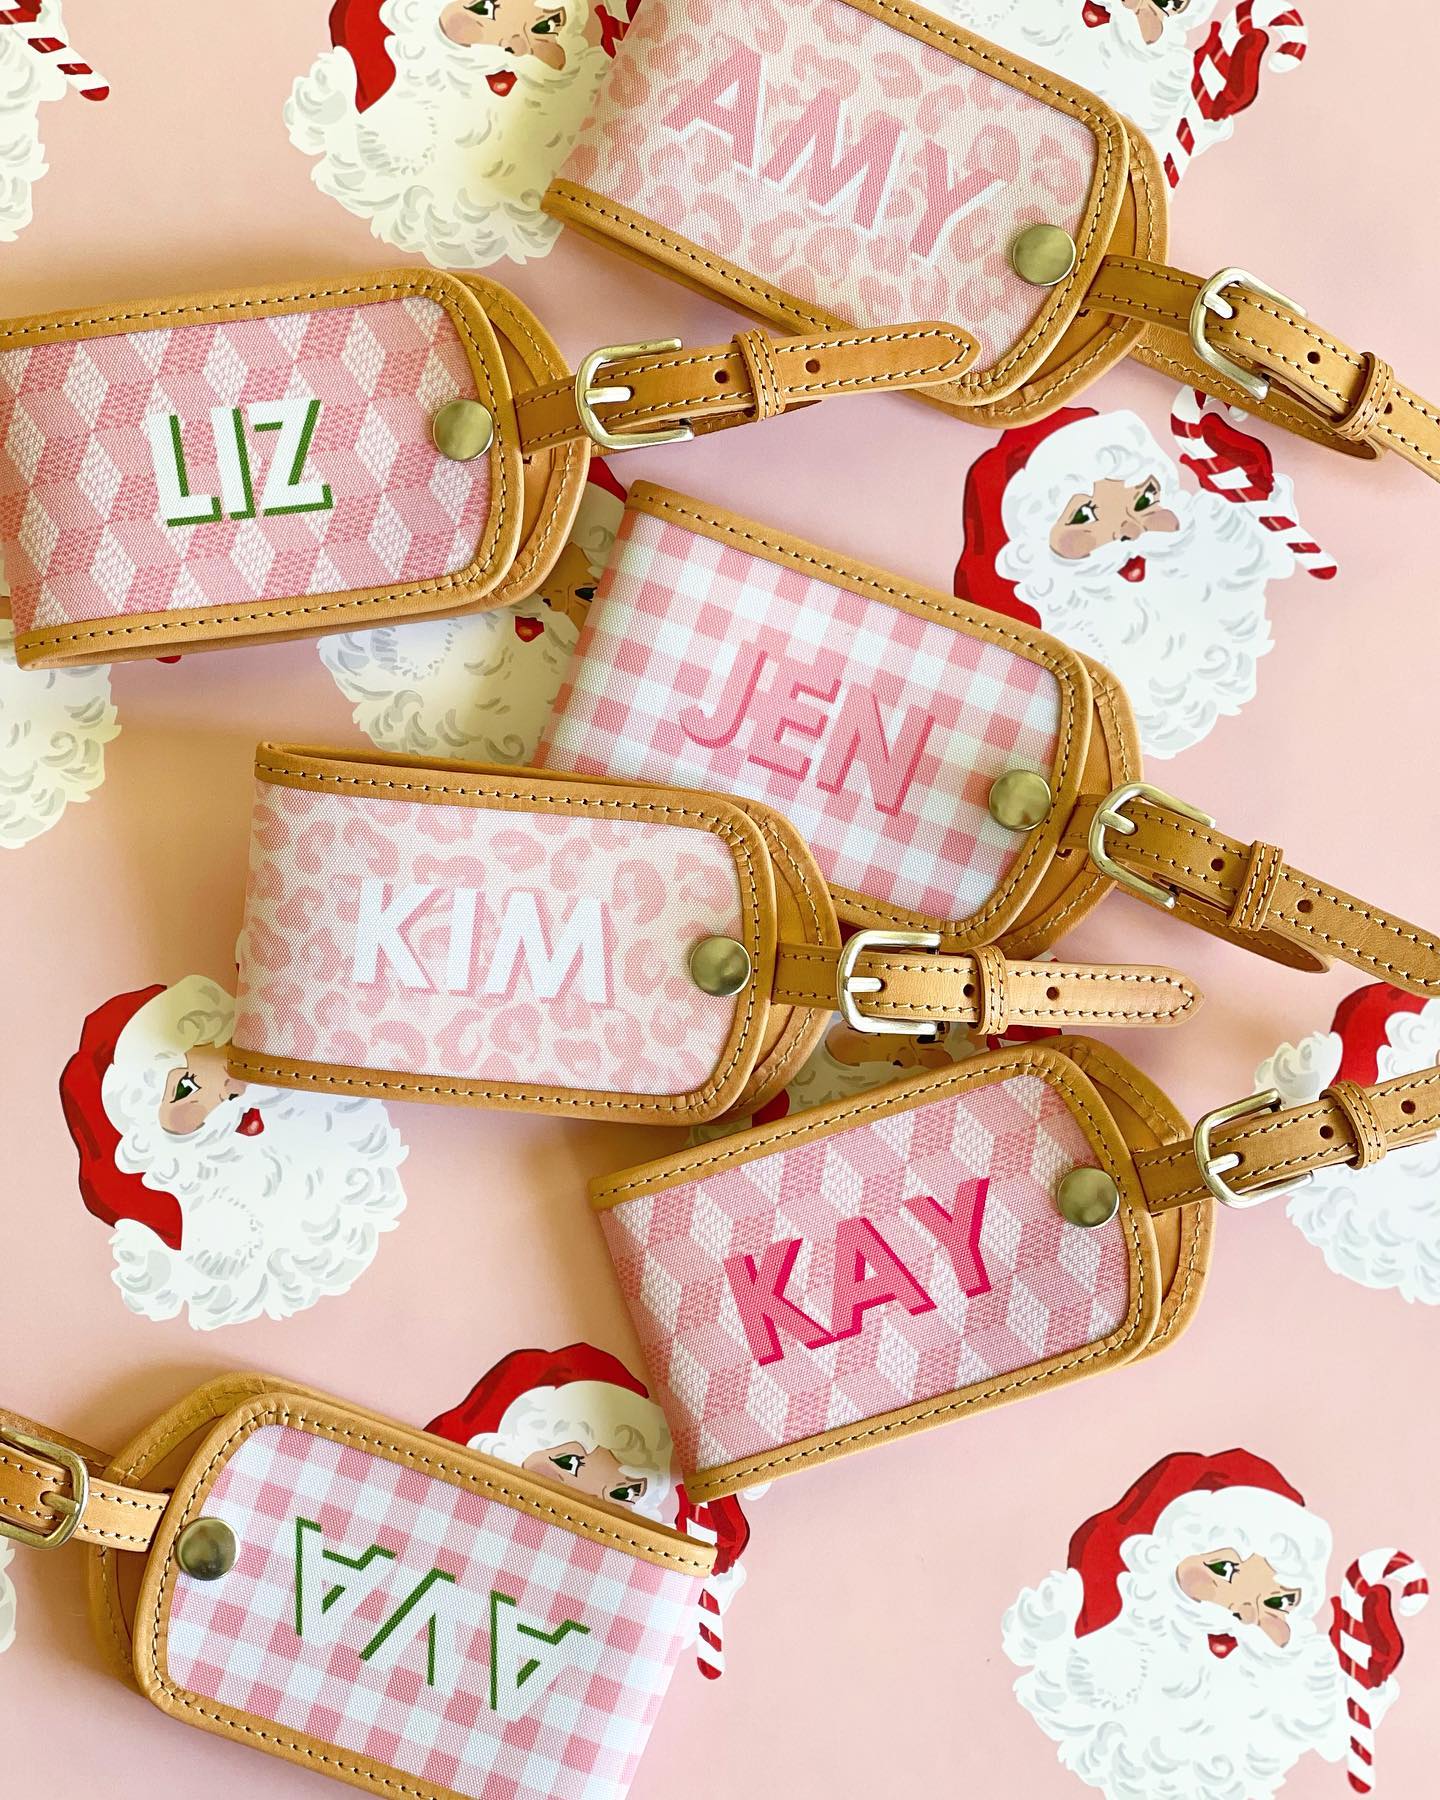 Personalized leather luggage tags with Santa Claus design, Christmas gift idea